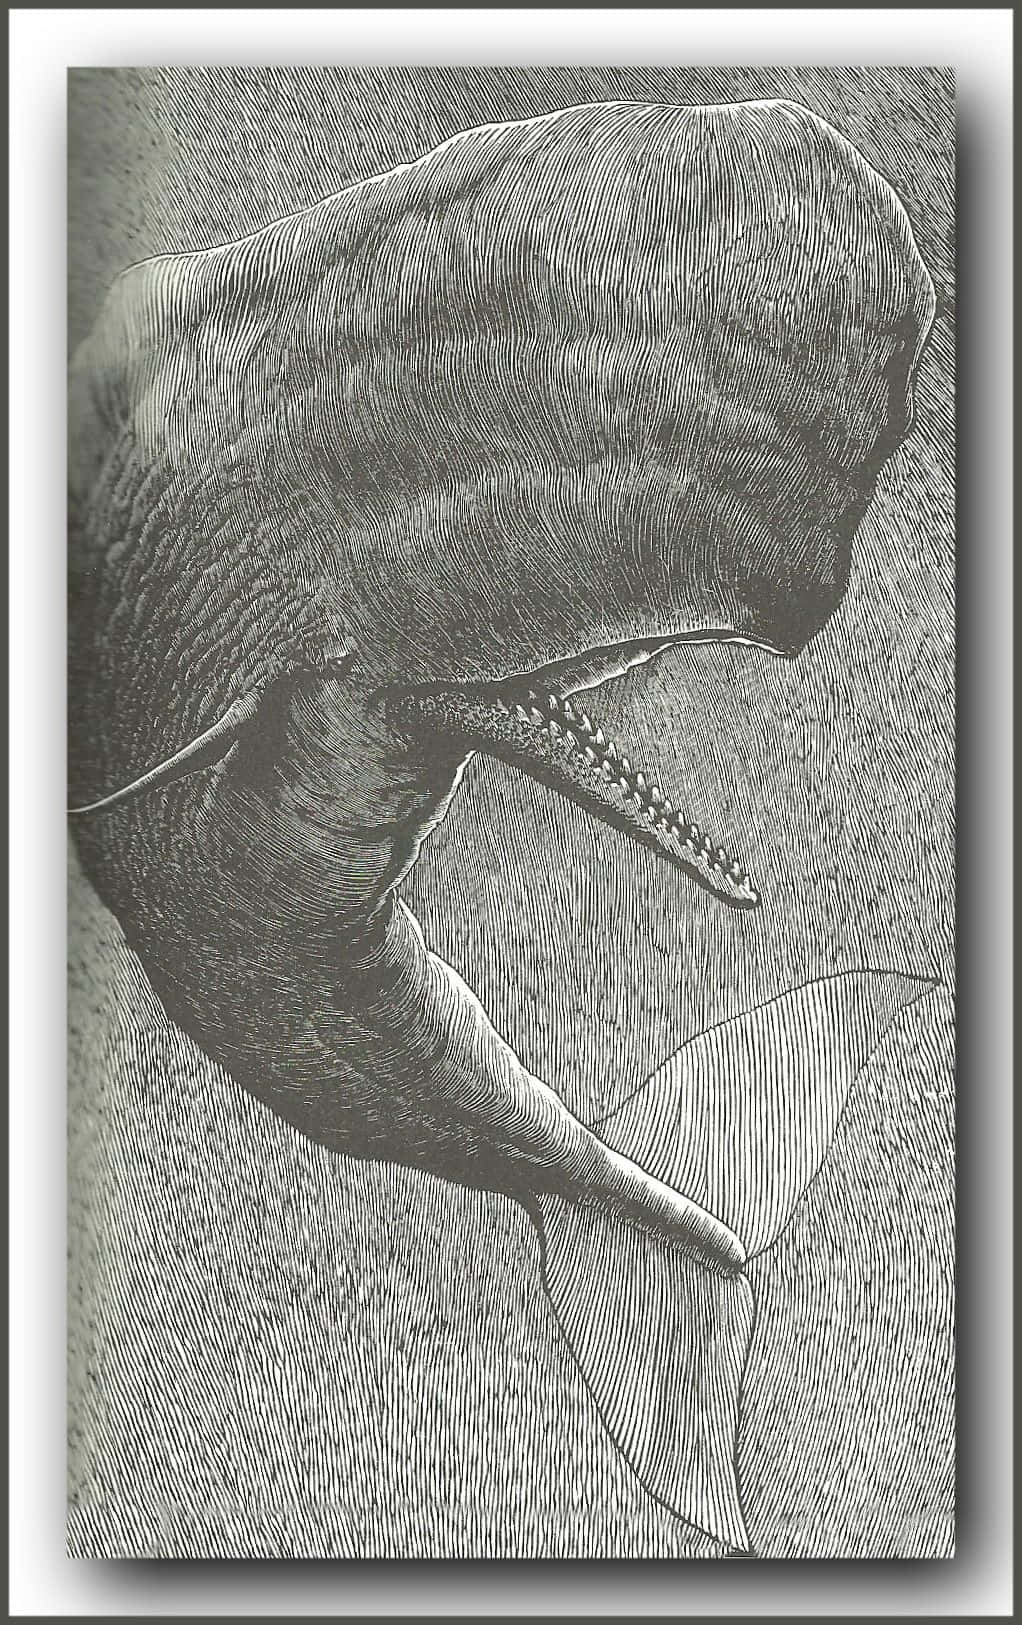 A Drawing Of A Whale With Its Mouth Open